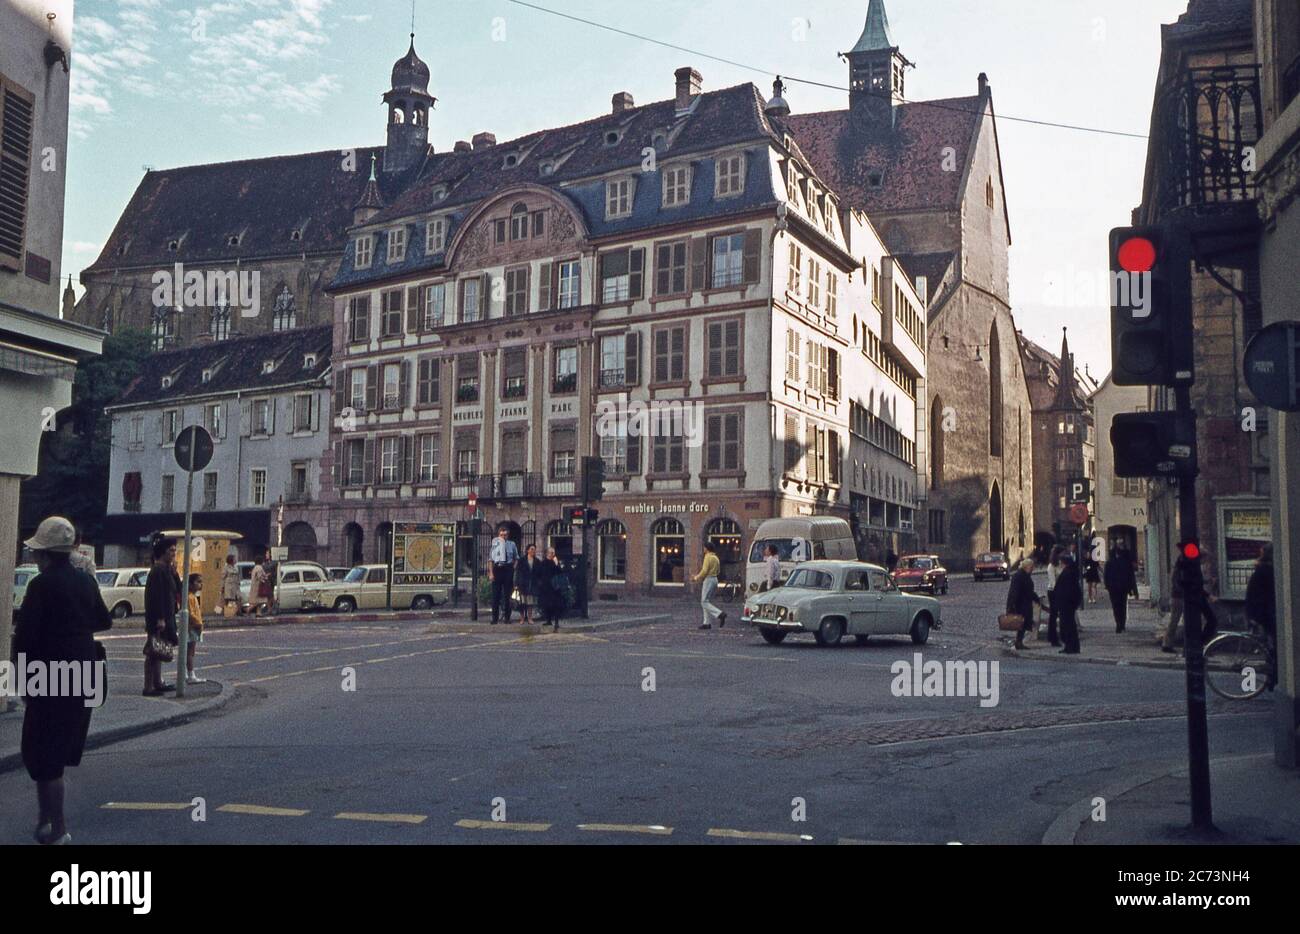 A street scene in Colmar, Alsace, France in 1968. This view is of the Place  Jeanne d'Arc looking SE from Rue Vauban. In the background is the church of  Eglise St Matthieu.